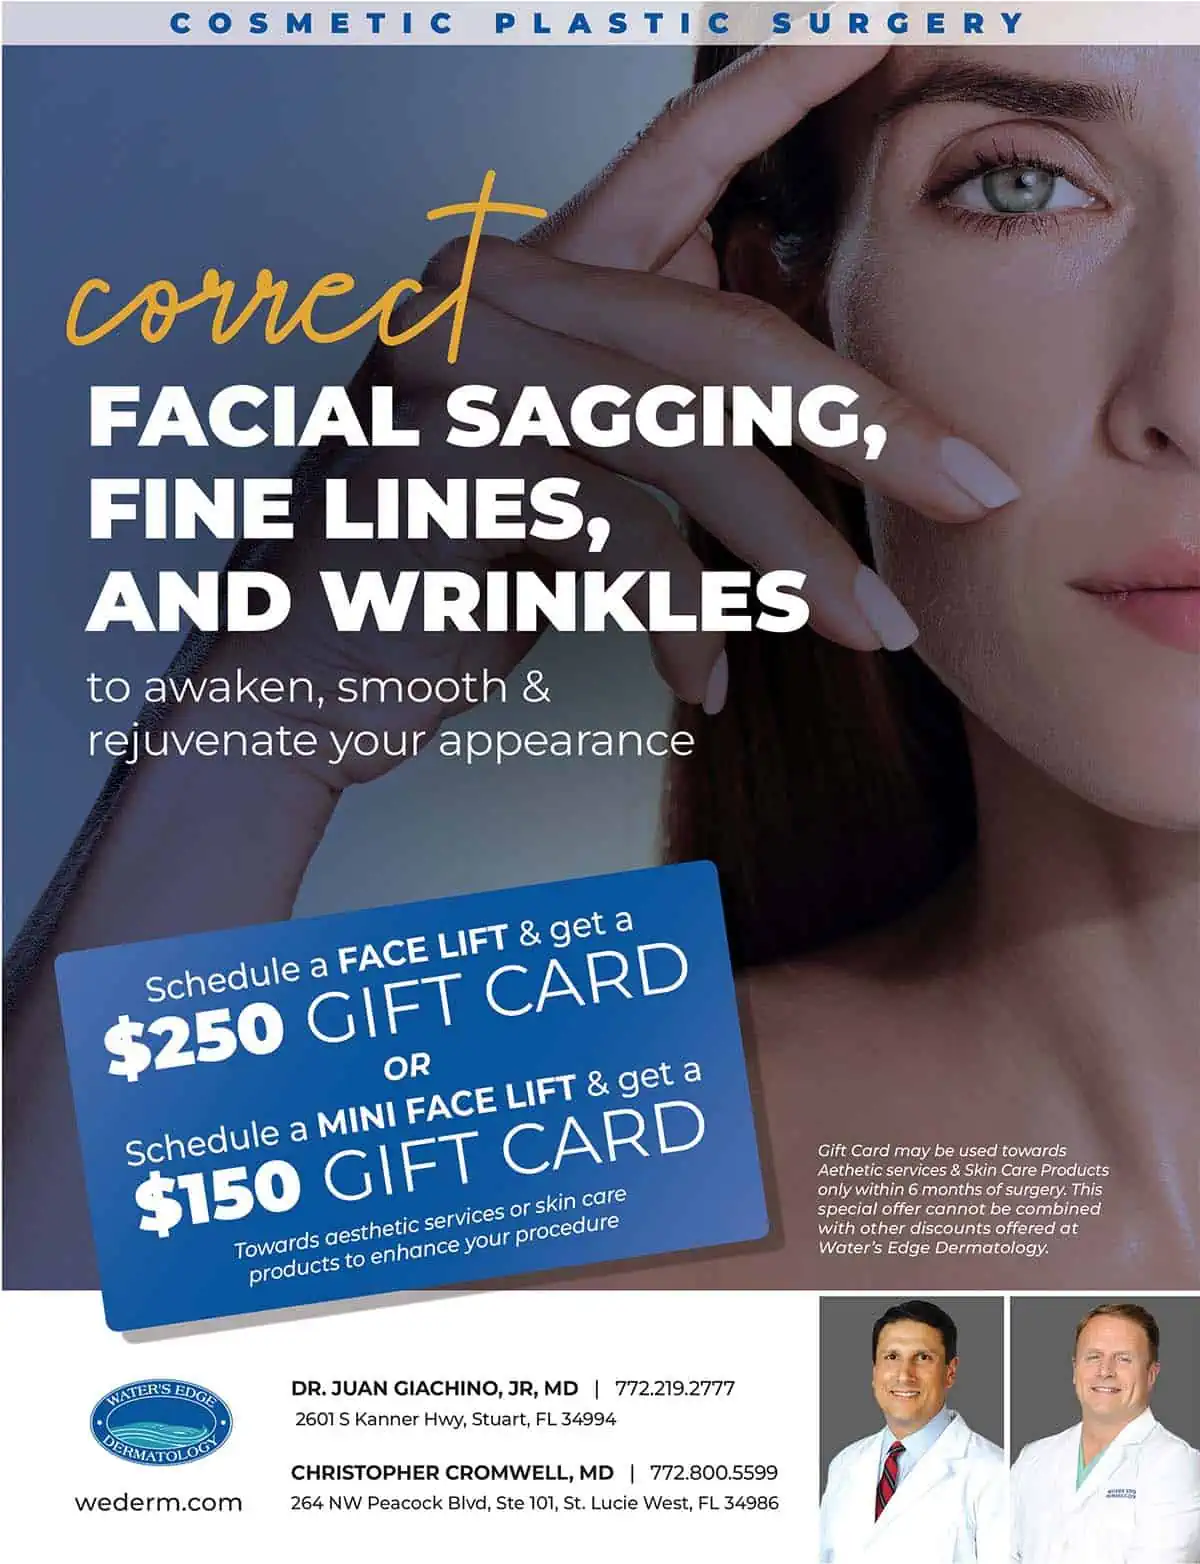 Cosmetic Plastic Surgery Procedures Promotions